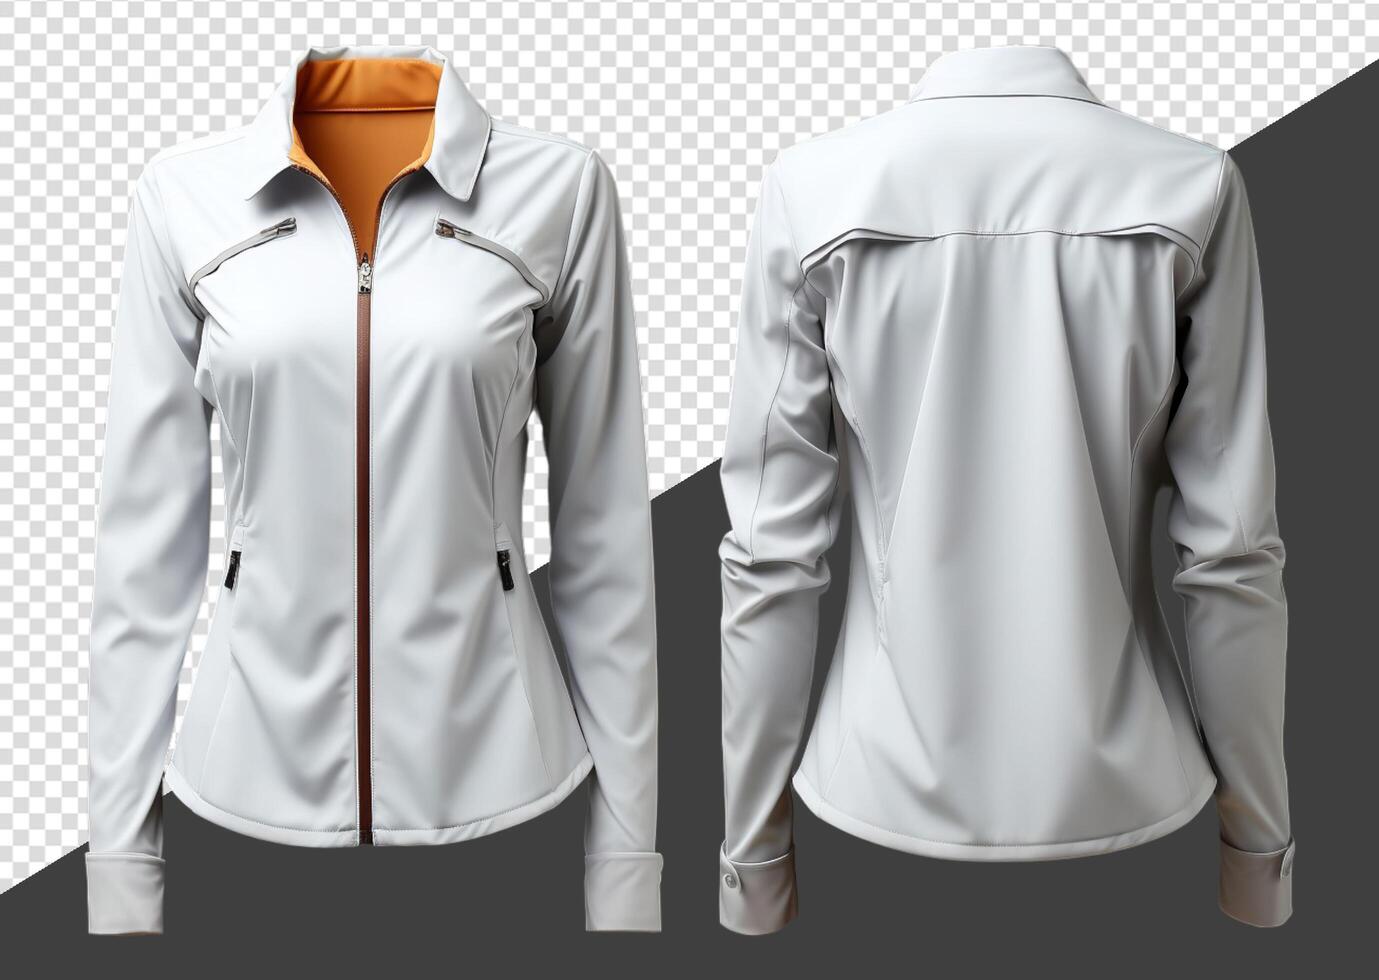 Plain white women's jacket mockup, Front and back view, isolated on transparent background, photo